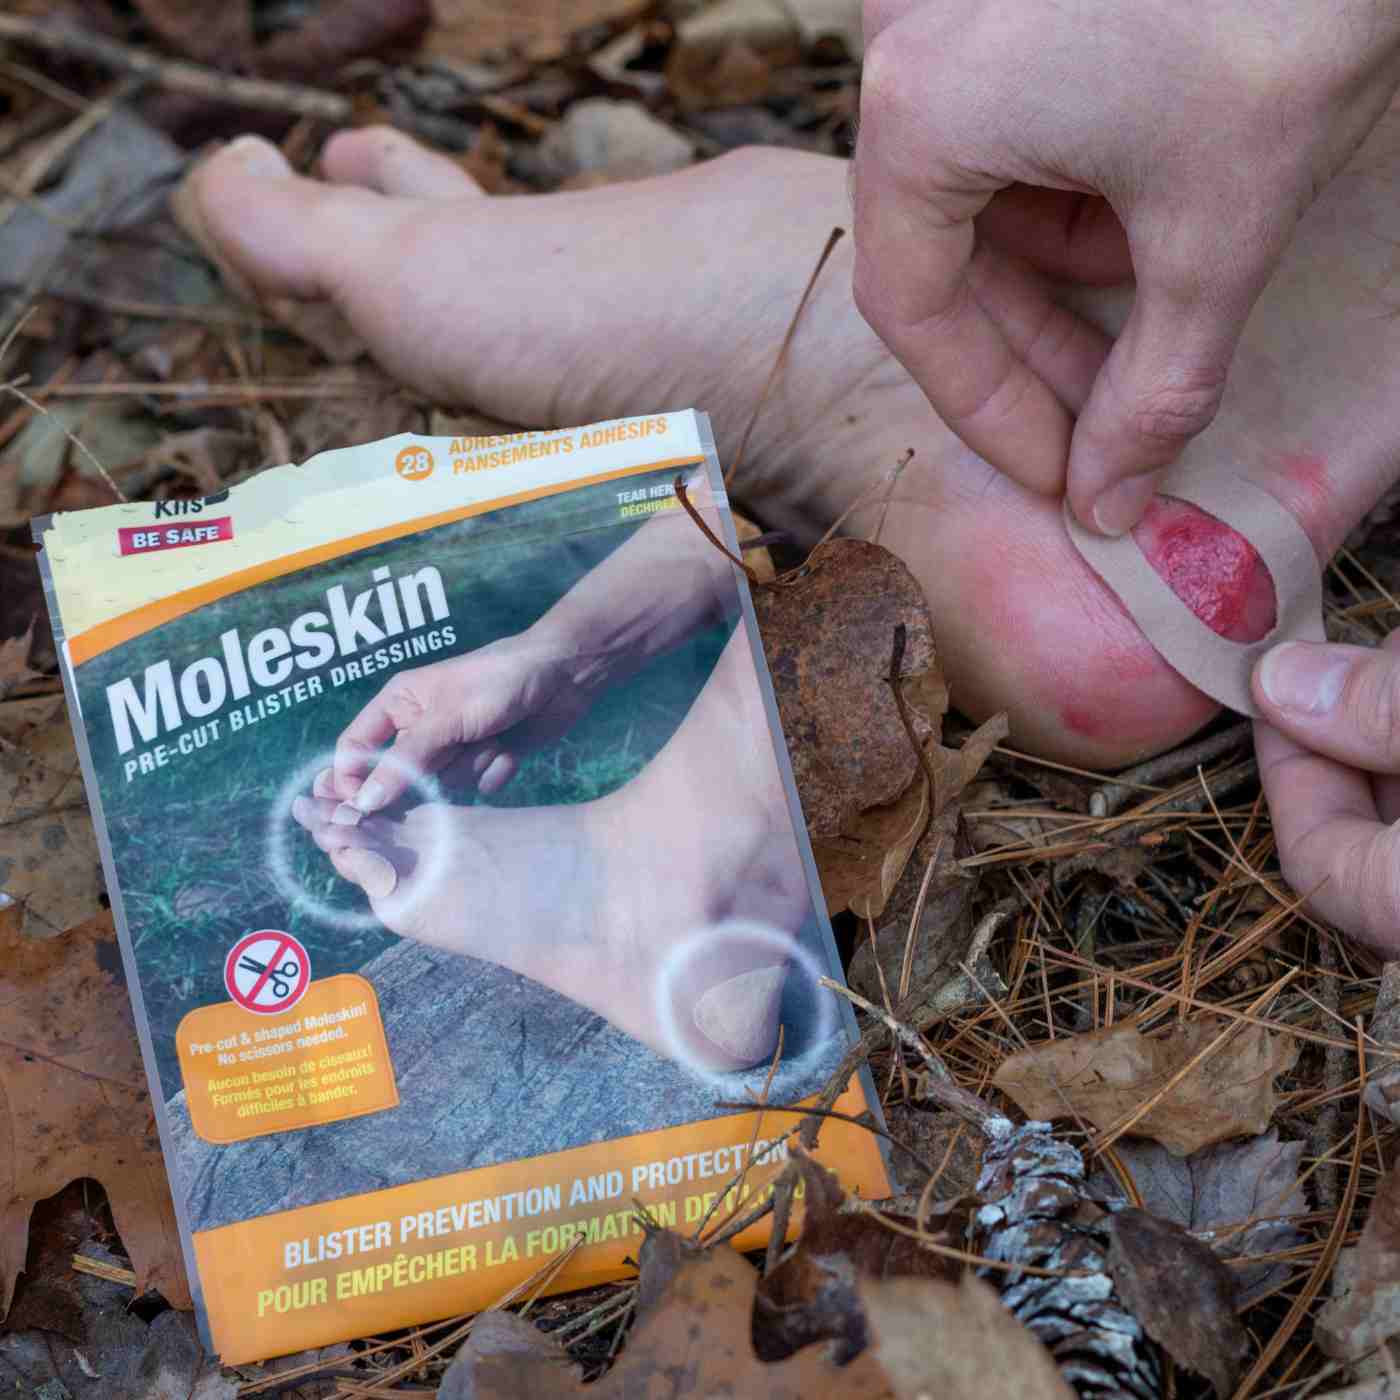 Moleskin Pre-Cut and Shaped applying to blister on foot on leaves next to package